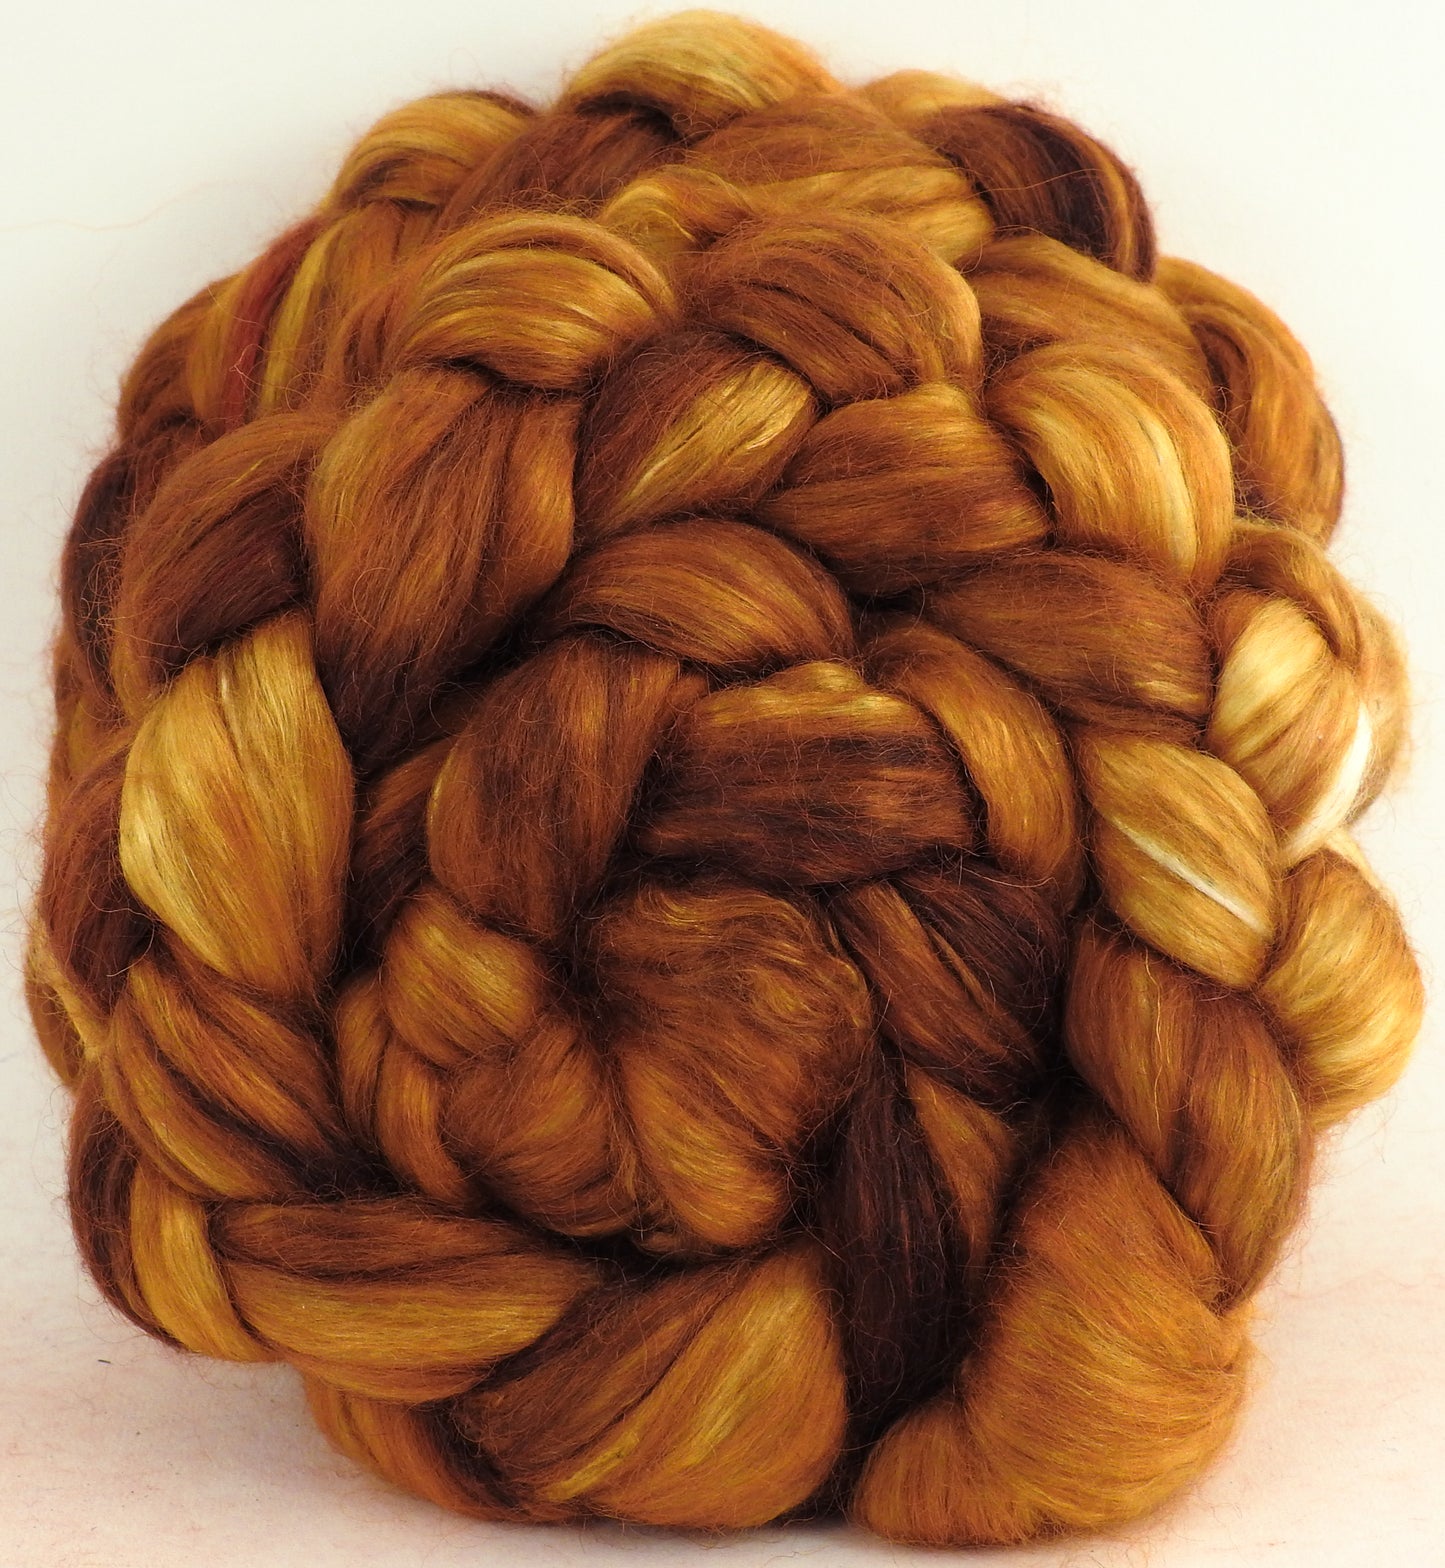 Strong Honey - Wensleydale/ Mulberry silk roving (65/35)